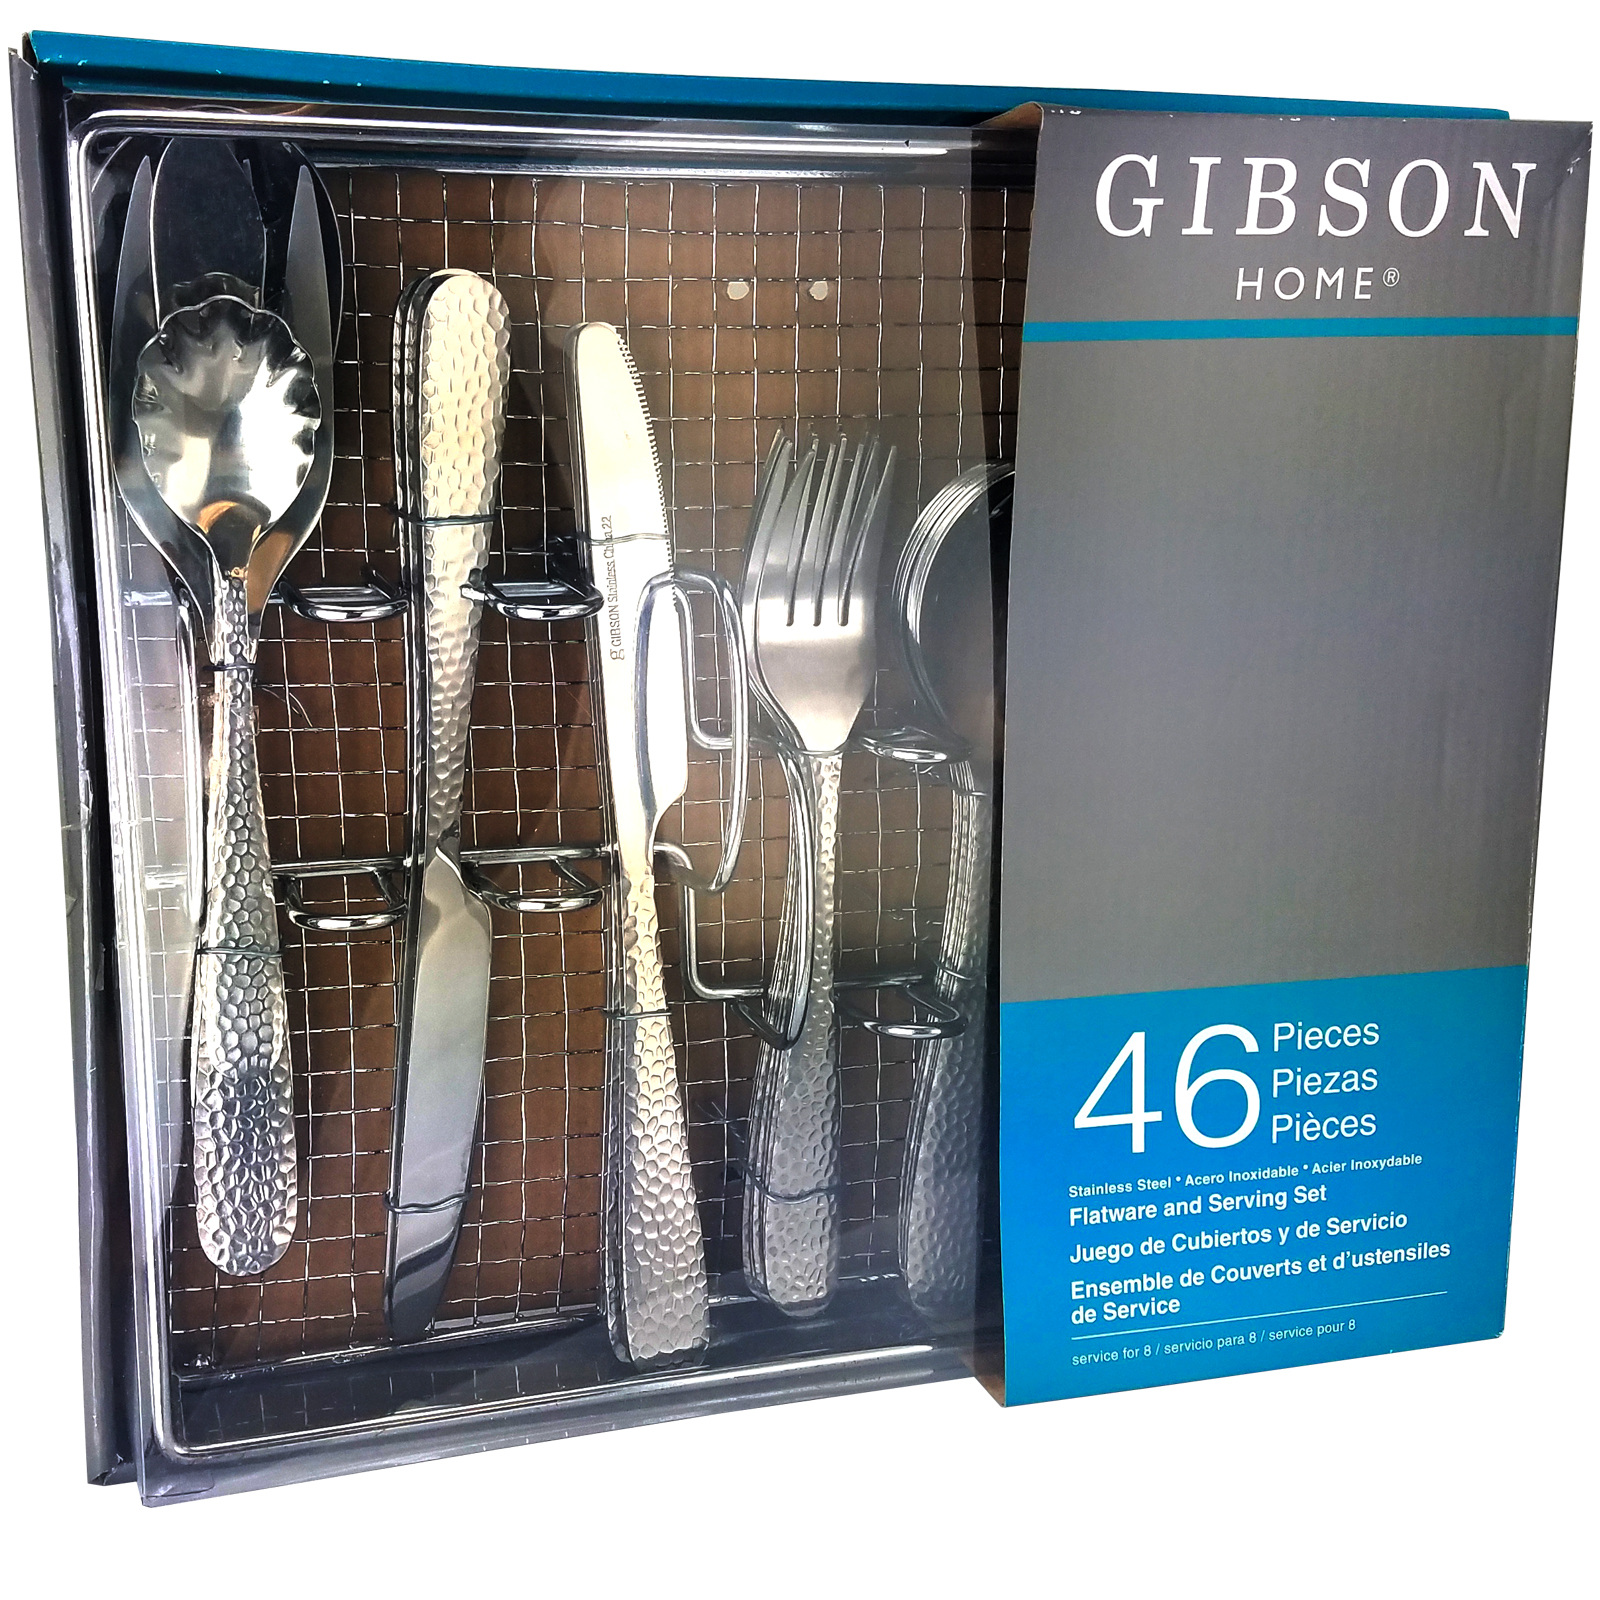 Gibson Home Hammered 46 Piece Flatware Set with Wire Caddy